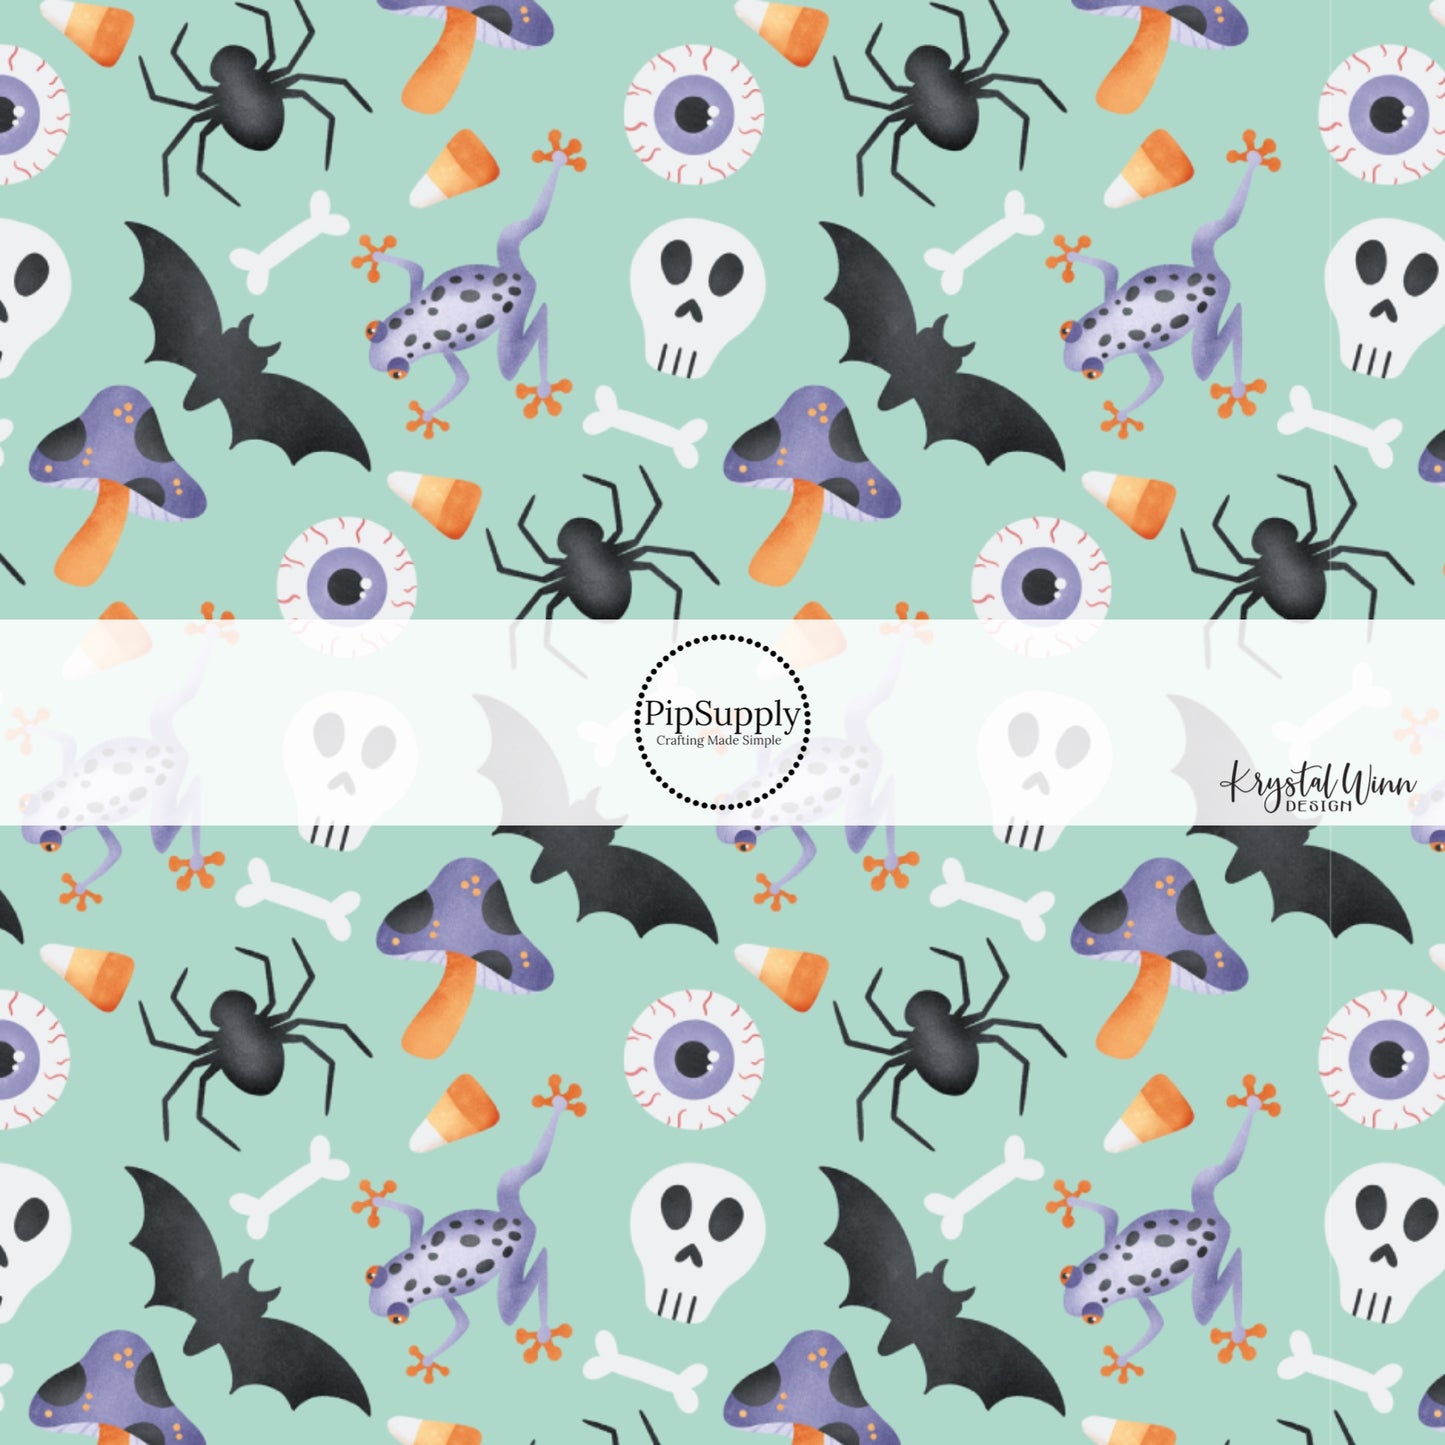 These Halloween themed blue no sew bow strips can be easily tied and attached to a clip for a finished hair bow. These fun spooky bow strips are great for personal use or to sell. The bow stripes features bats, skulls, eyeballs, spiders, and candy on light blue.